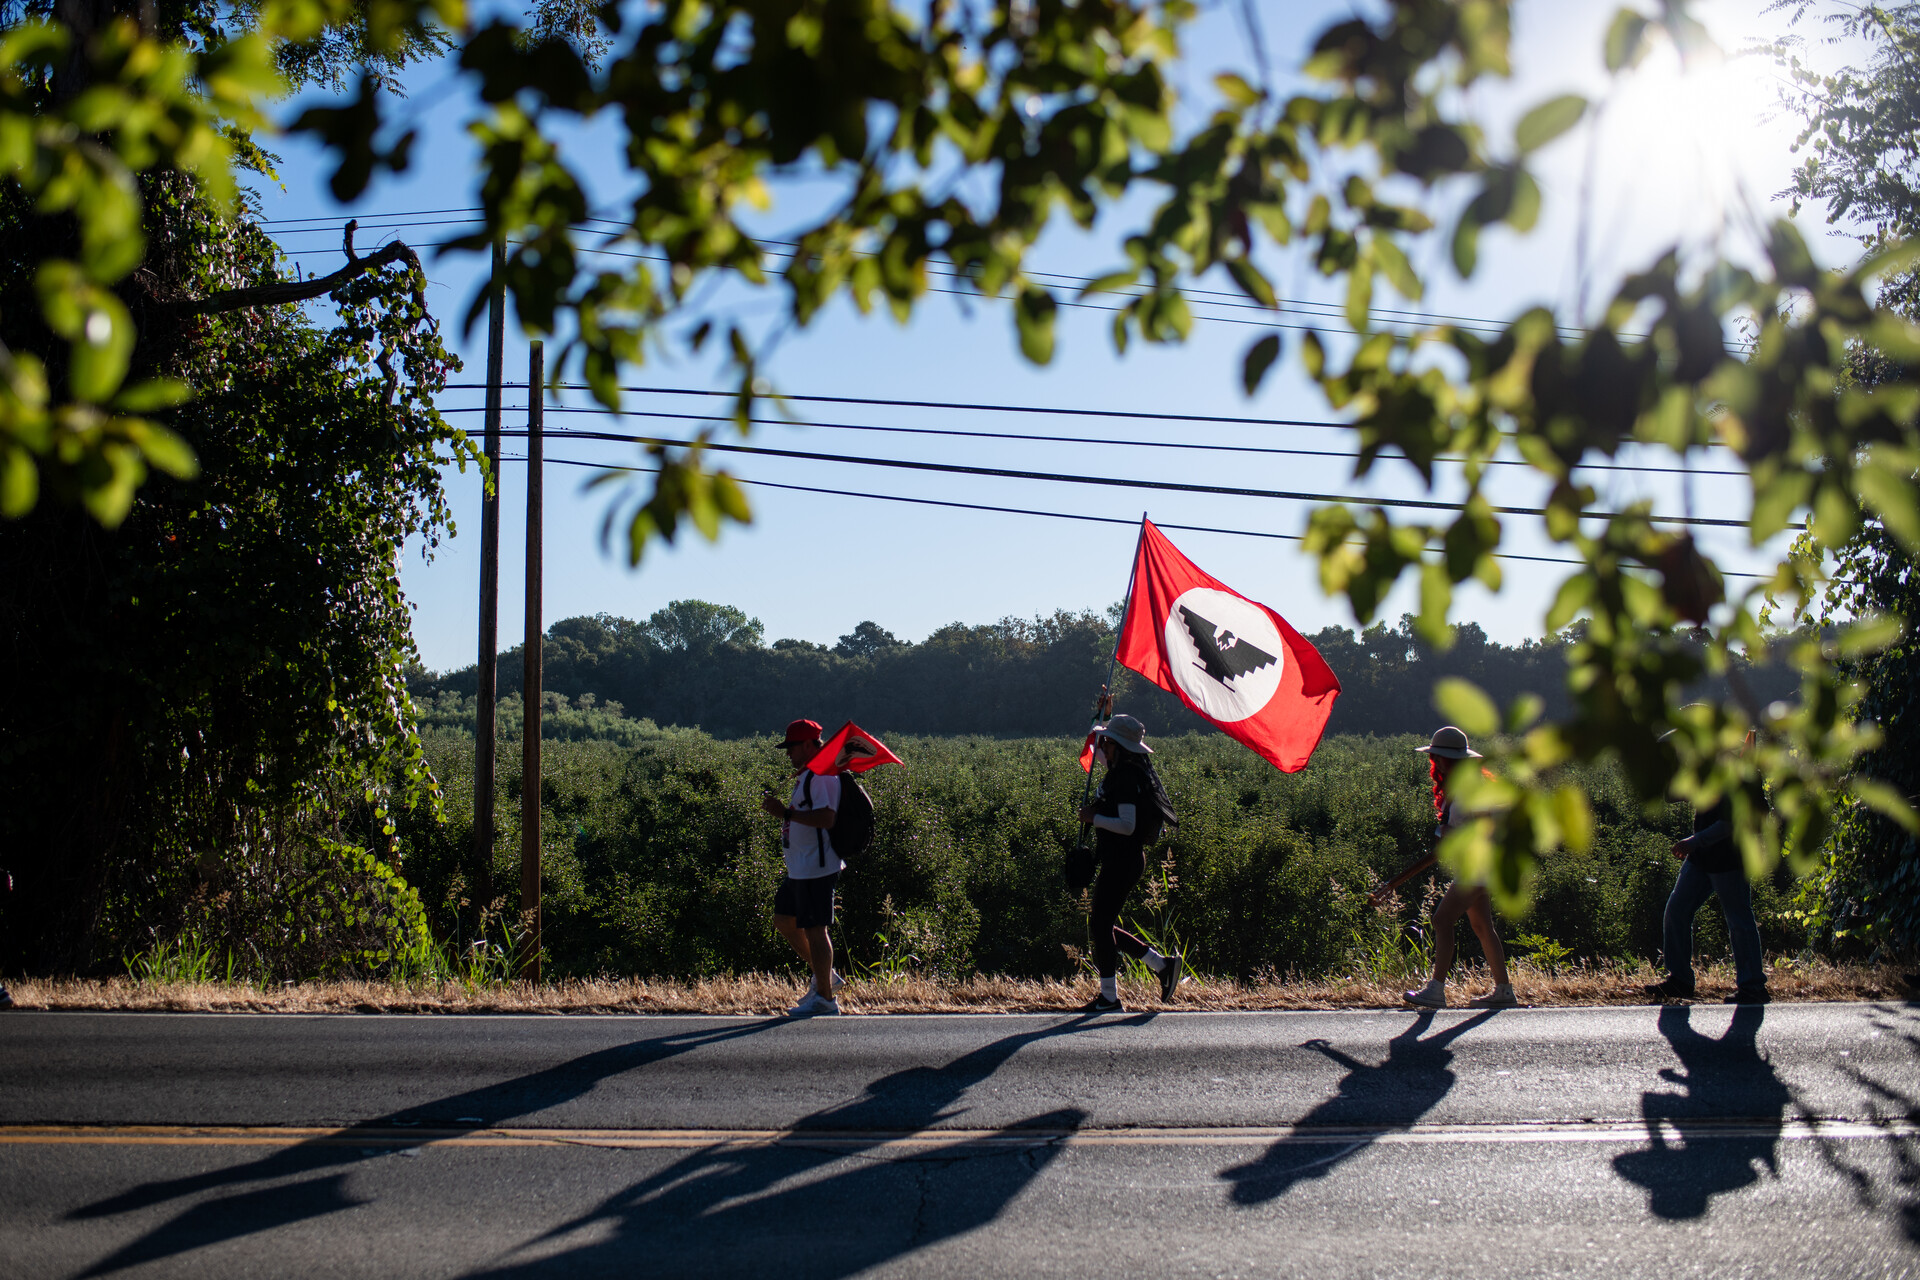 A rural highway set against green fields, where four people can be seen in silhouette marching with red flags.